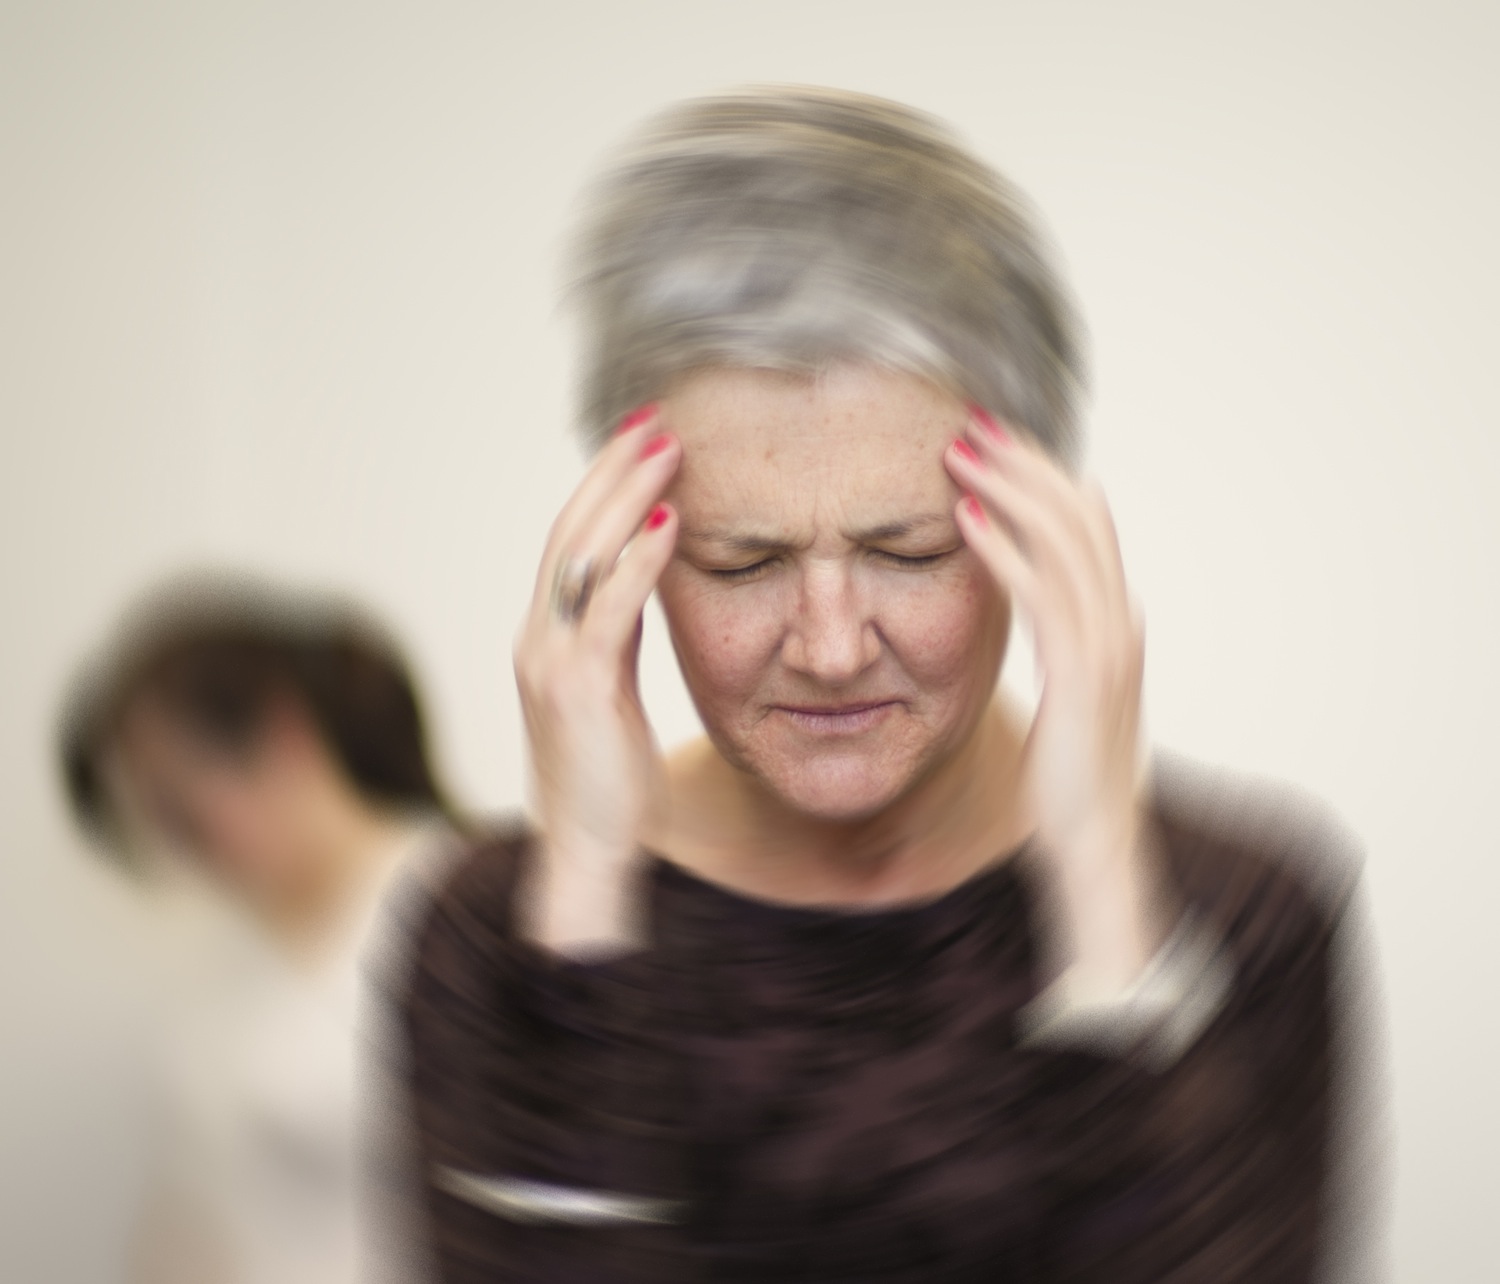 Dizziness can be physically debilitating and extremely distressing.